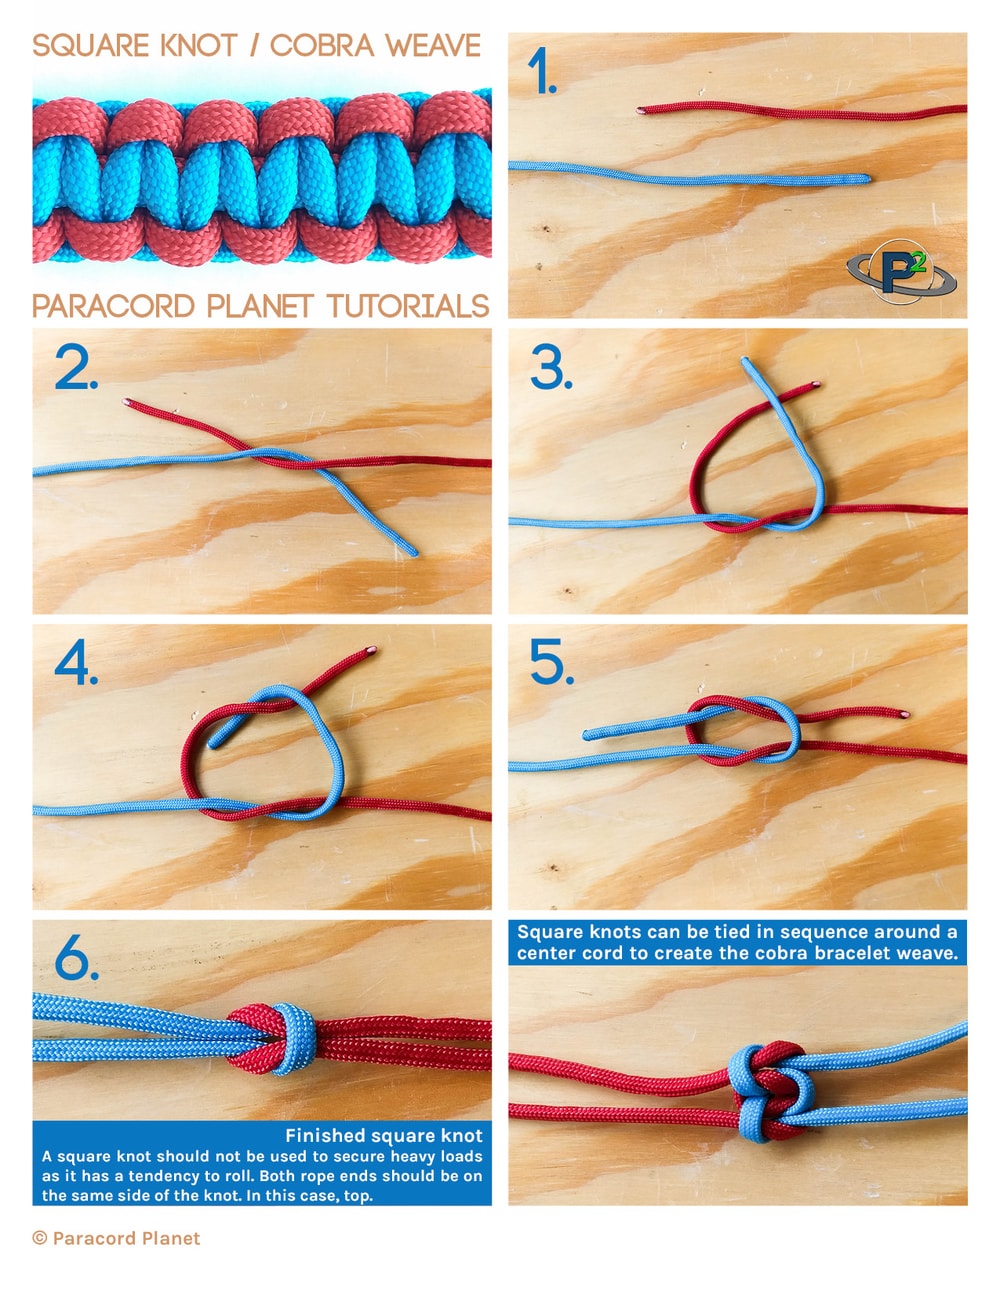 Square Knot / Square Knot Song And Overhand Knot Song Scouter Mom / It ...